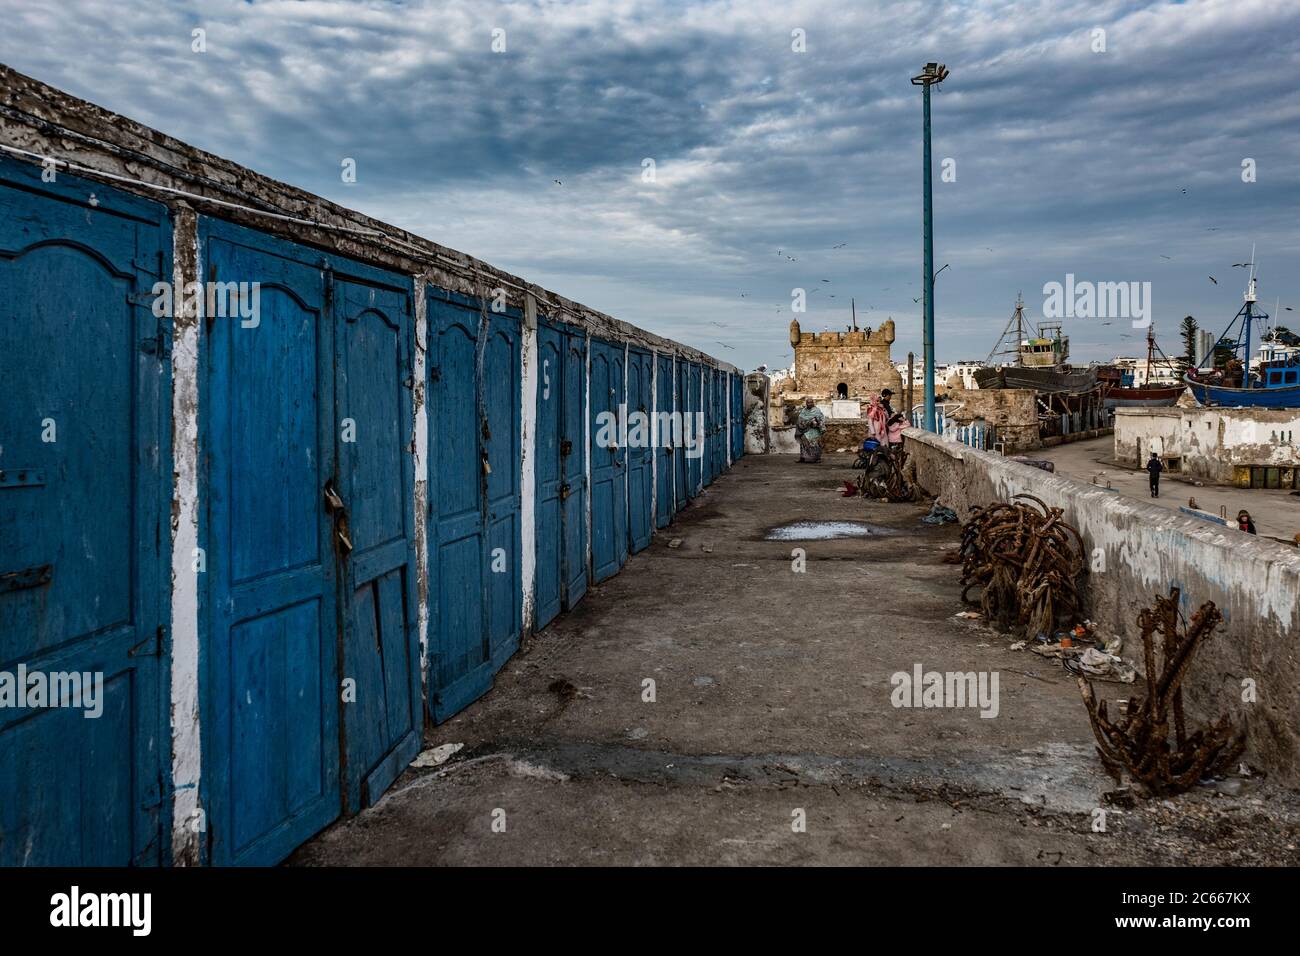 Blue doors at the fishing houses in Essaouira Stock Photo